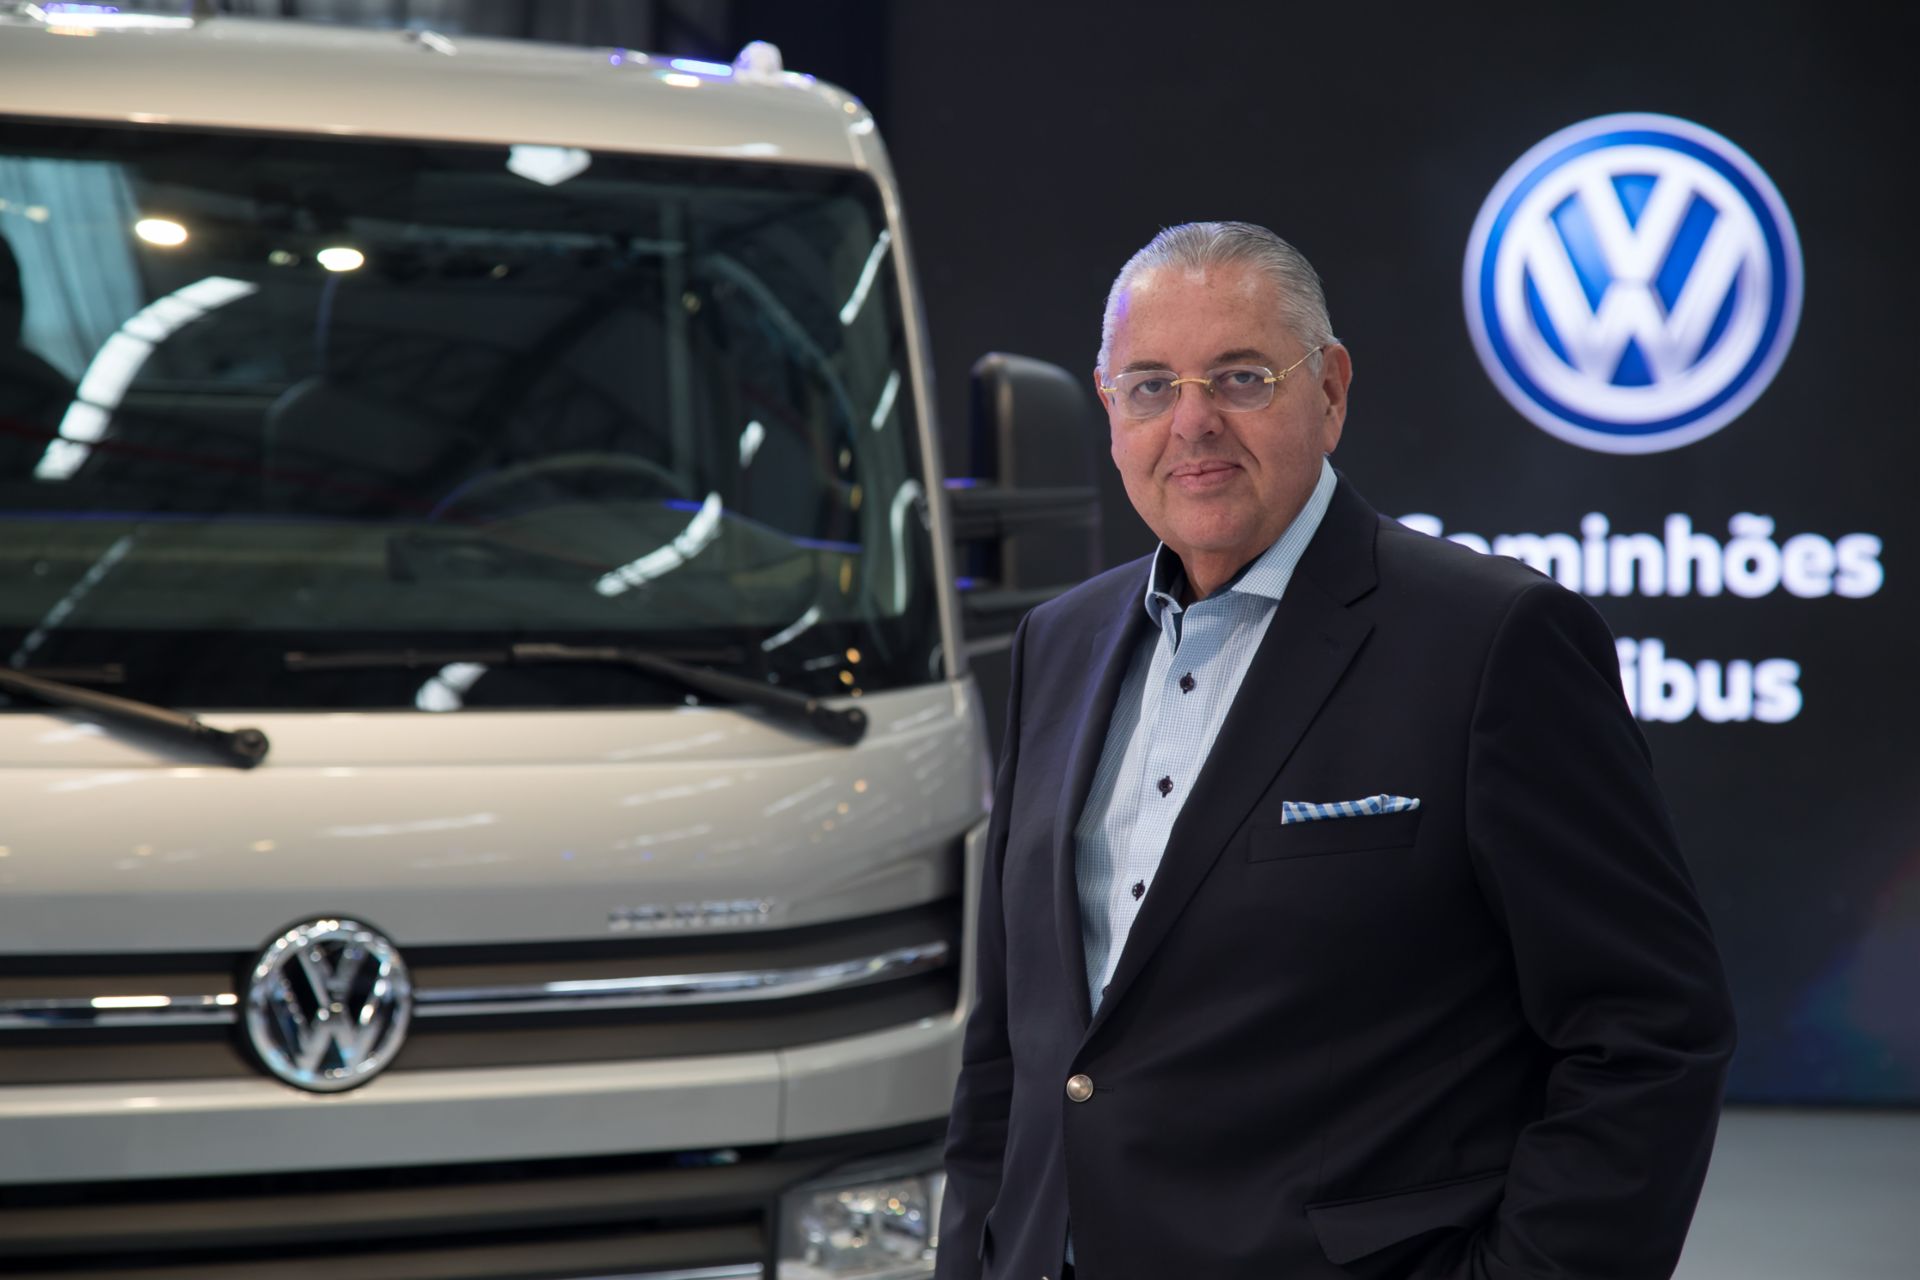 Mr. Roberto Cortes is Member of the Executive Board of TRATON SE, Chief Executive Officer Volkswagen Truck & Bus